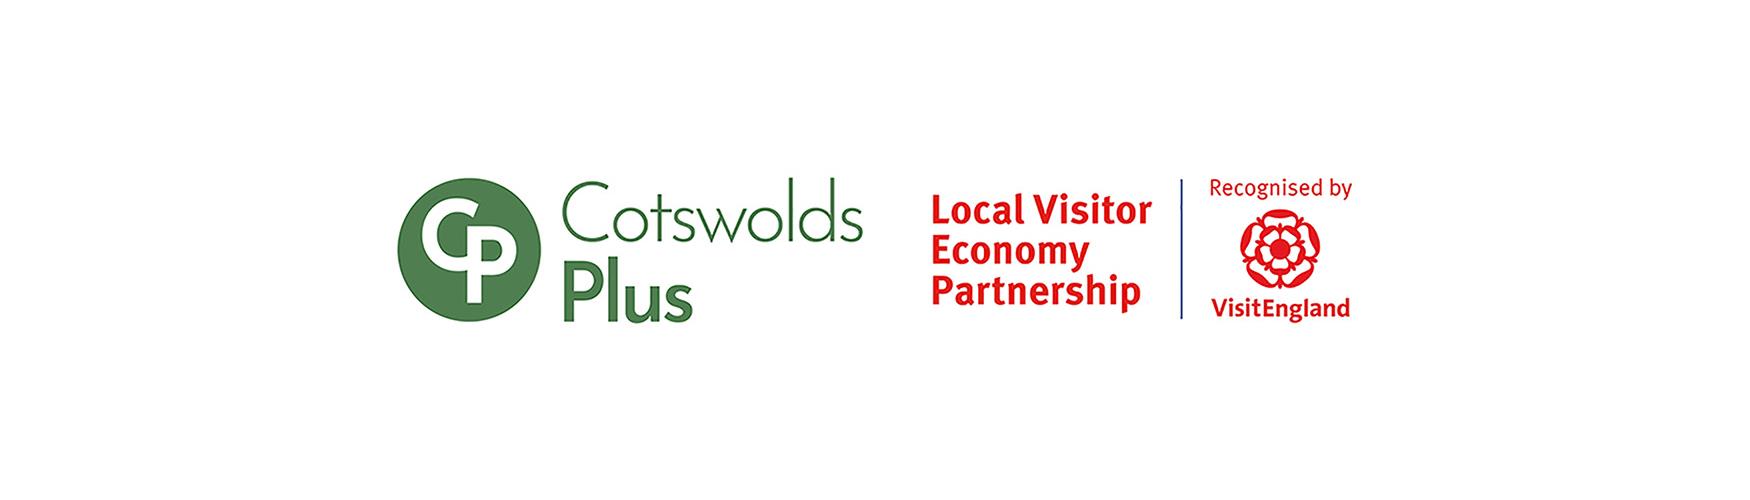 Cotswolds Plus and VisitEngland Local Visitor Economy Partnership logos